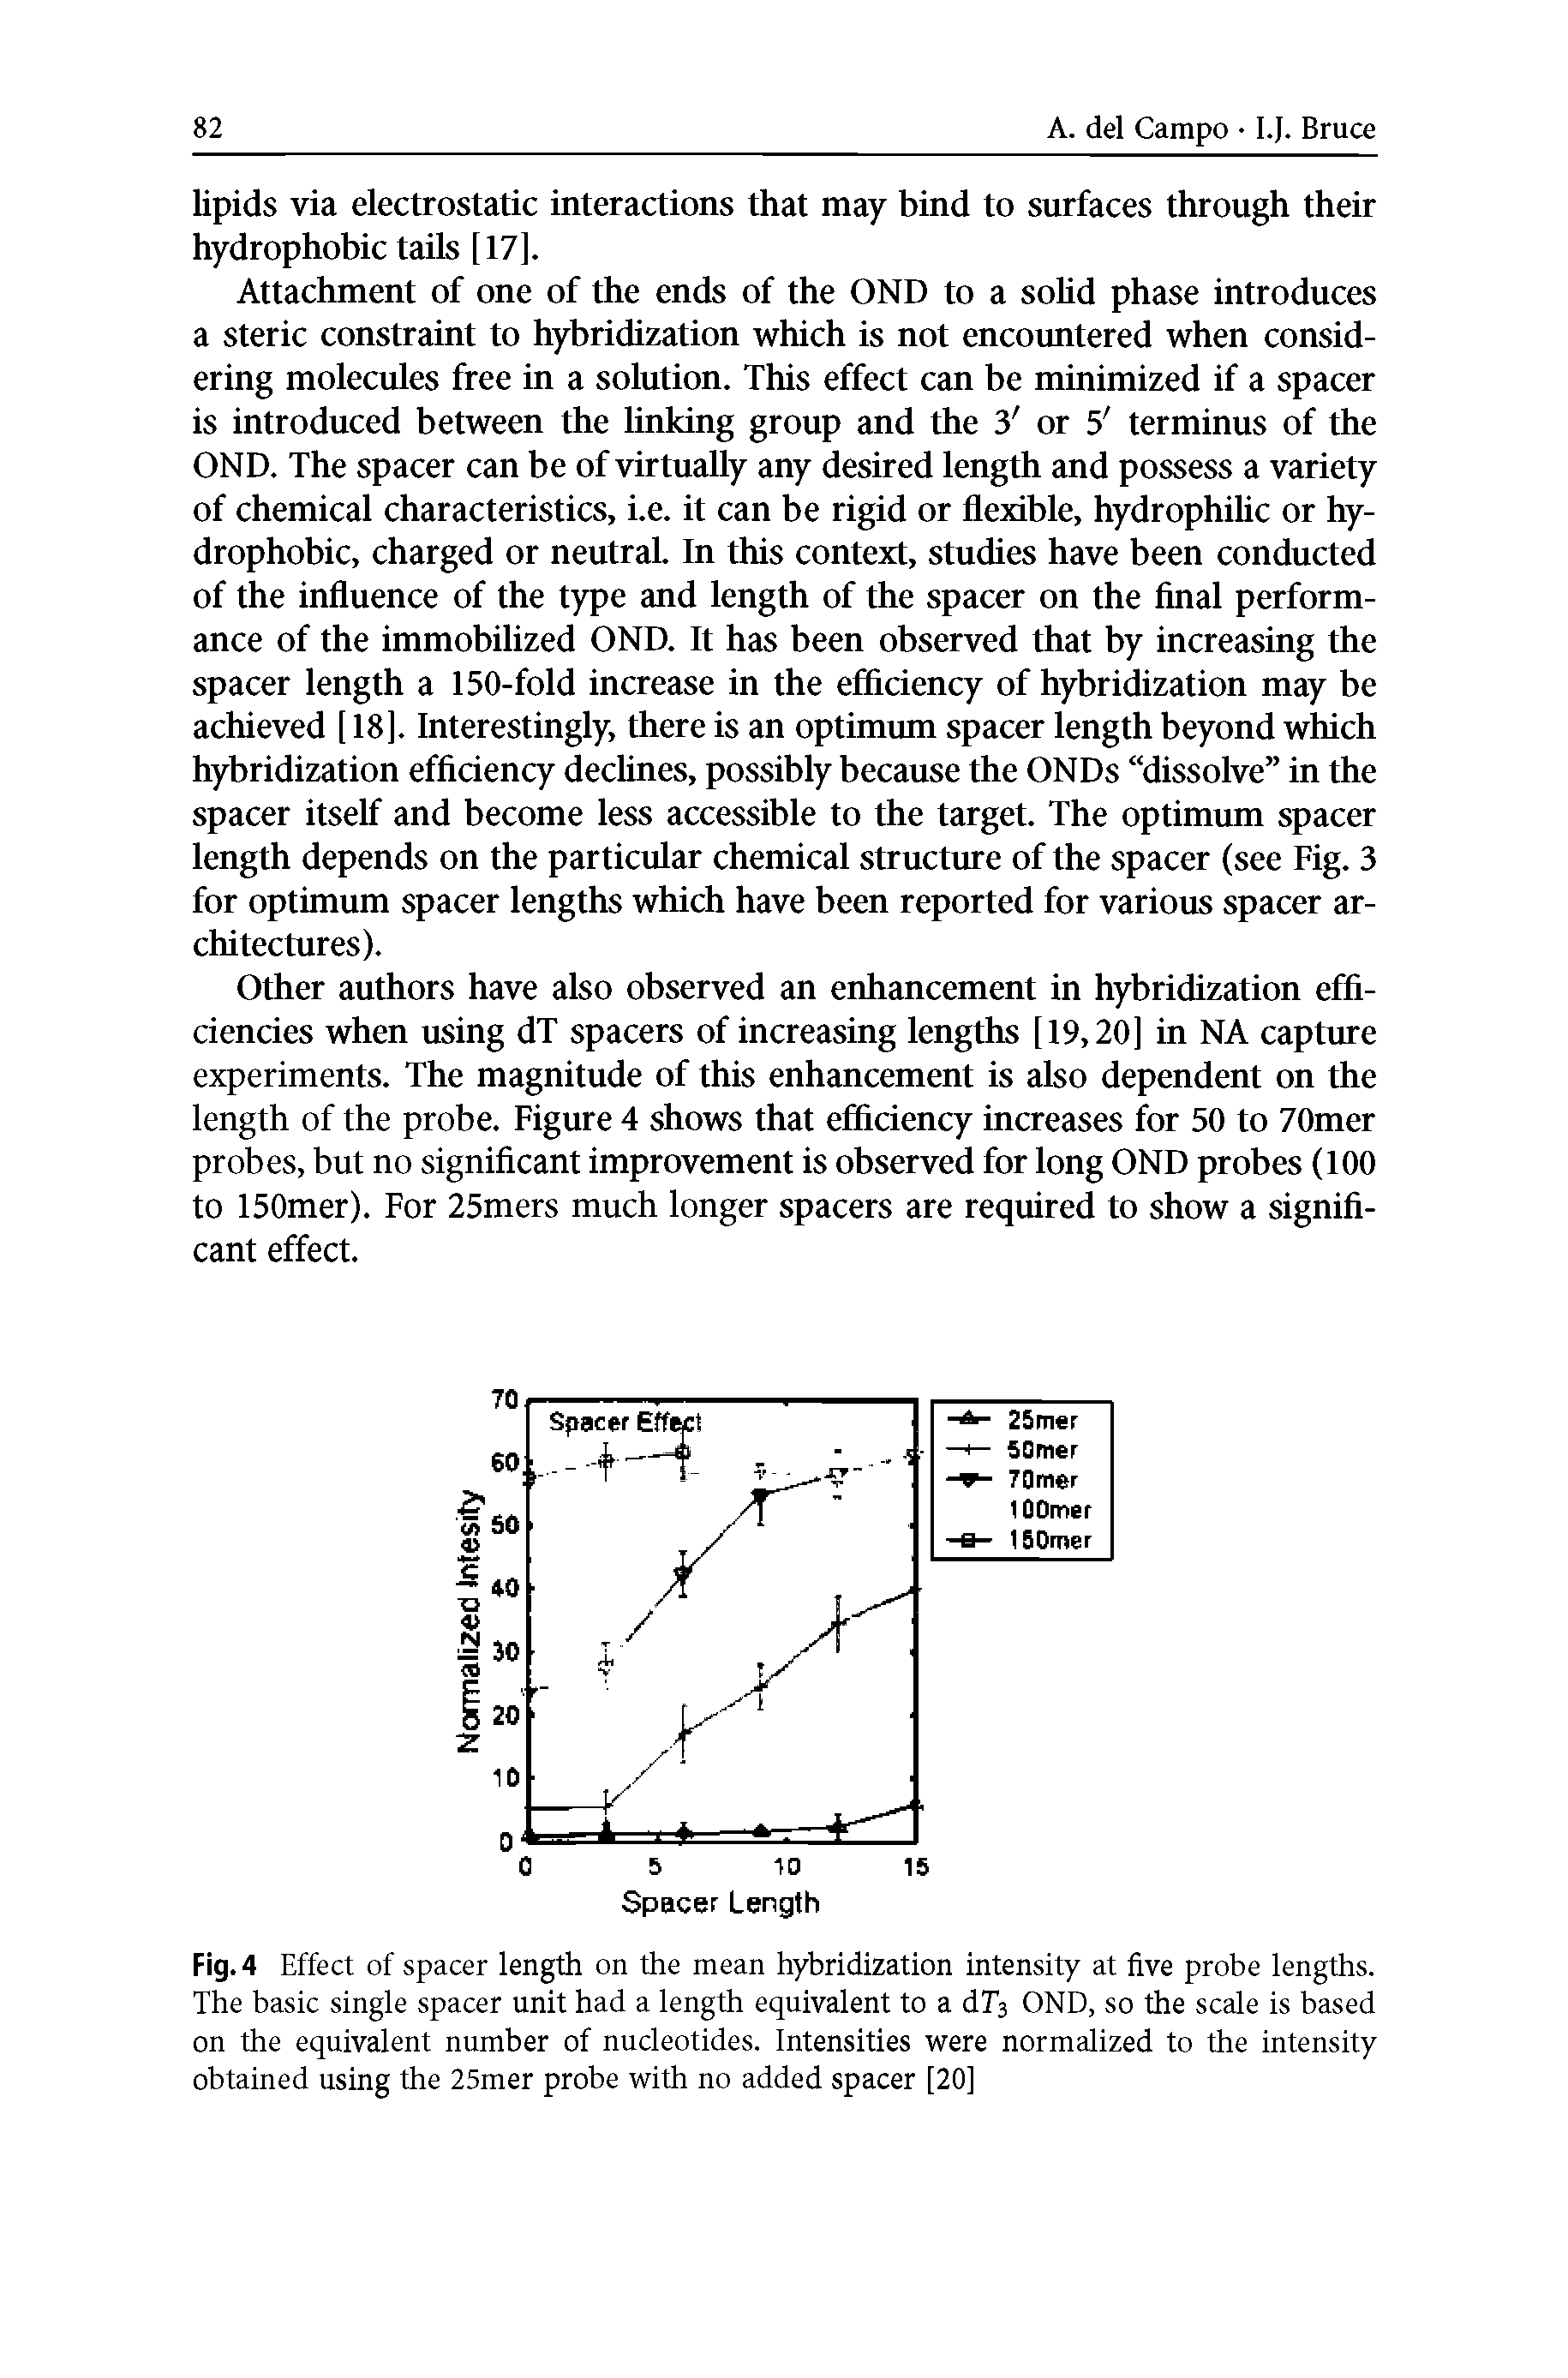 Fig. 4 Effect of spacer length on the mean hybridization intensity at five probe lengths. The basic single spacer unit had a length equivalent to a dT OND, so the scale is based on the equivalent number of nucleotides. Intensities were normalized to the intensity obtained using the 25mer probe with no added spacer [20]...